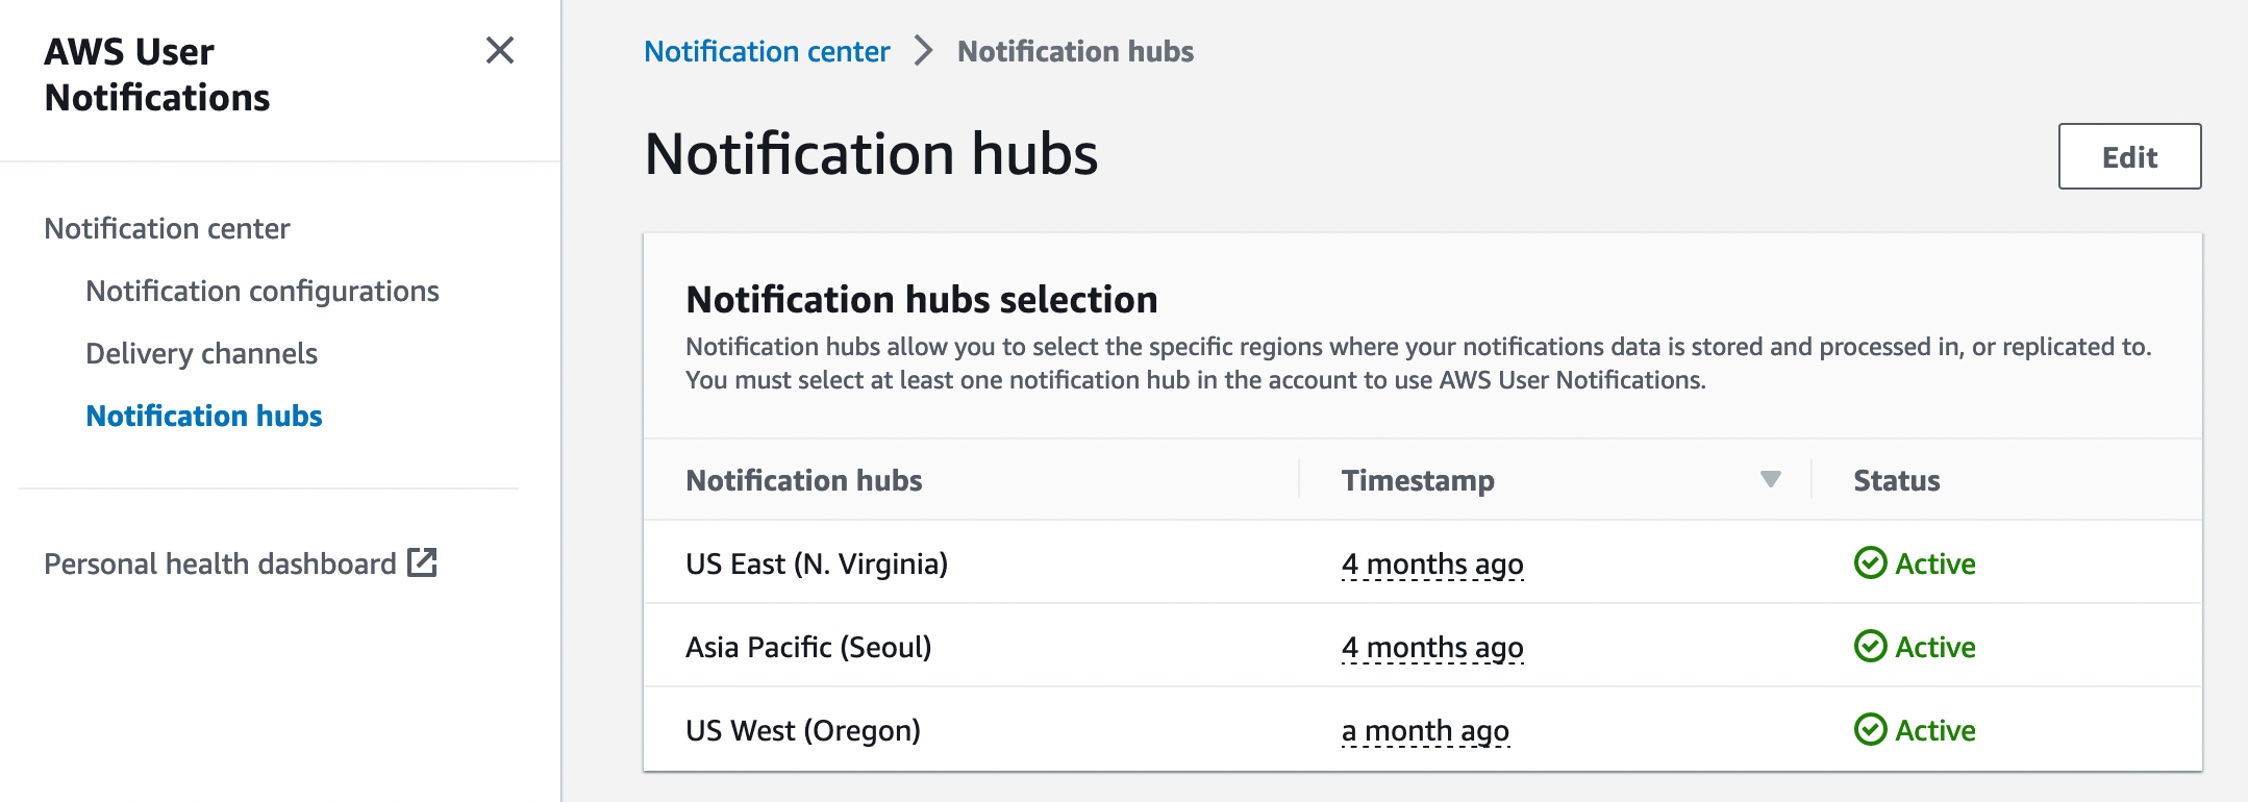 aws user notifications